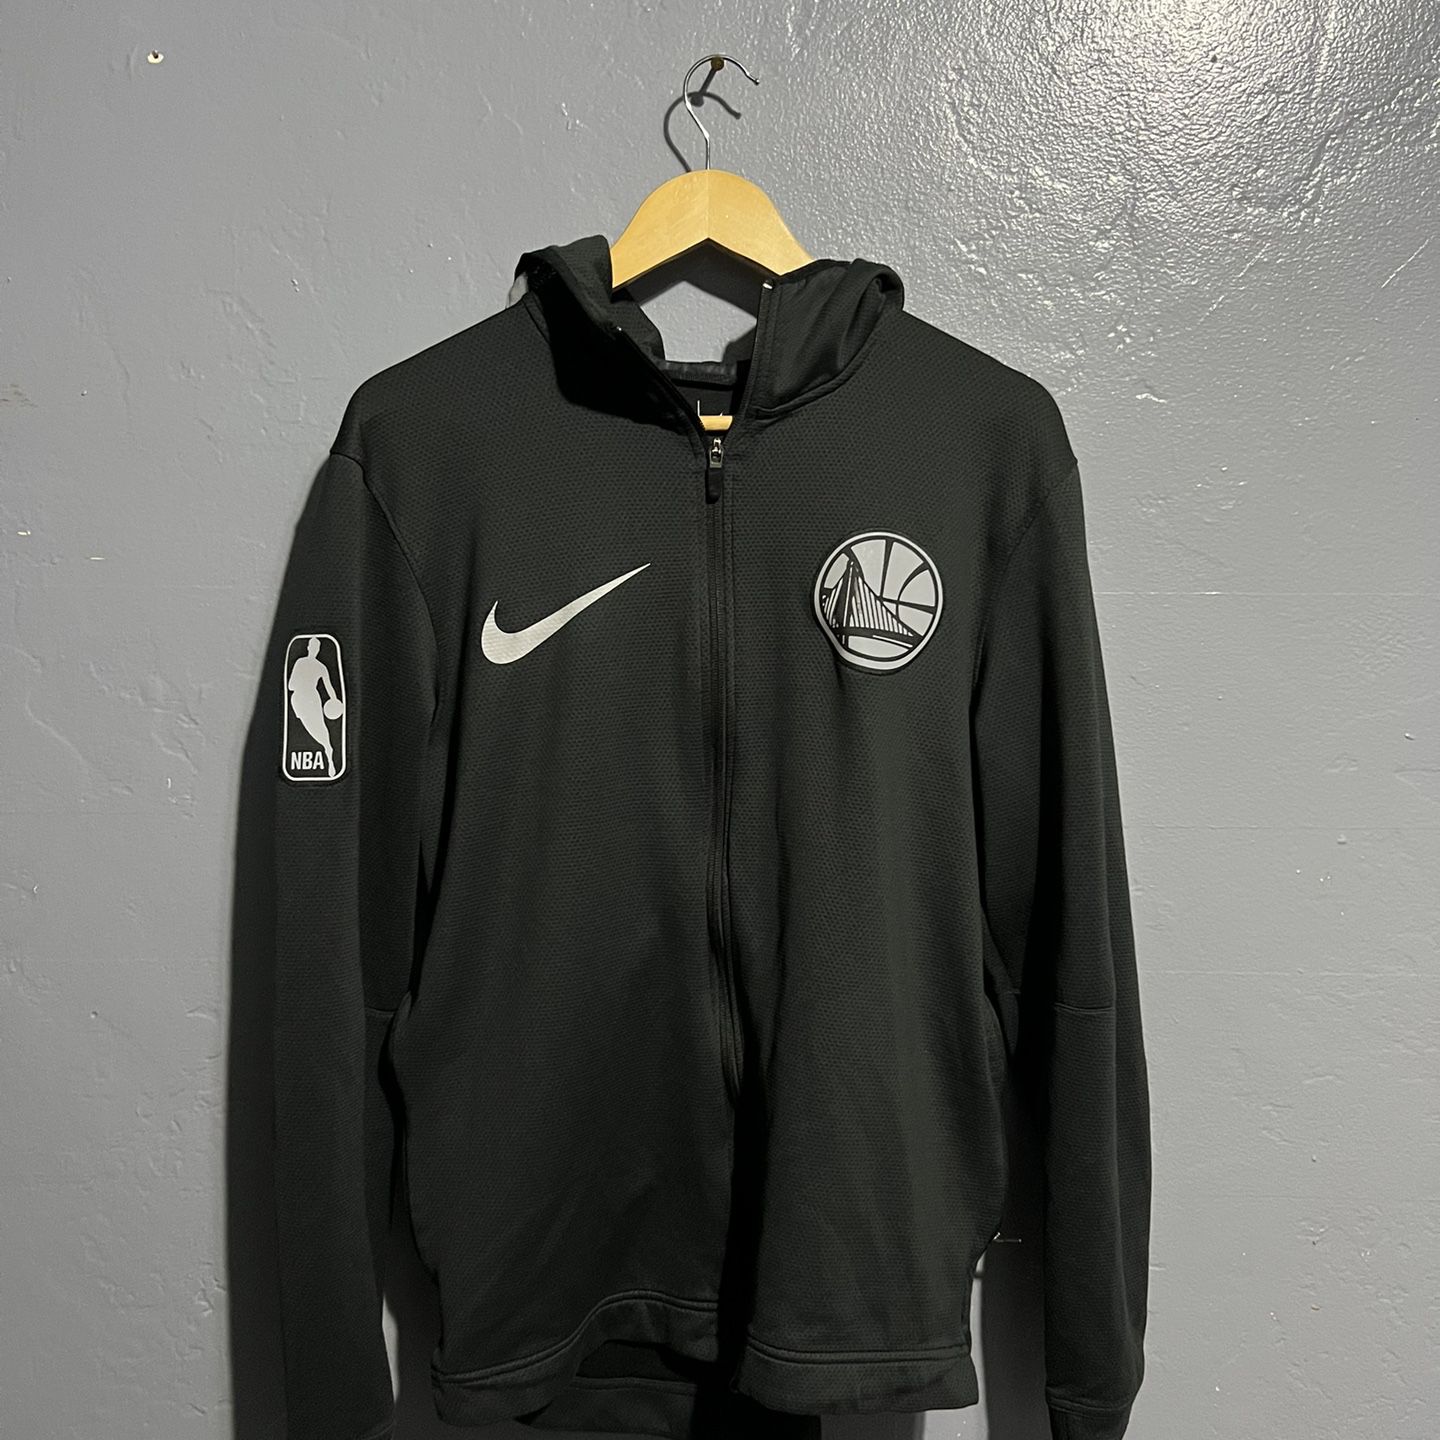 GOLDEN STATE WARRIORS NIKE JACKET THE BAY for Sale in Hayward, CA - OfferUp